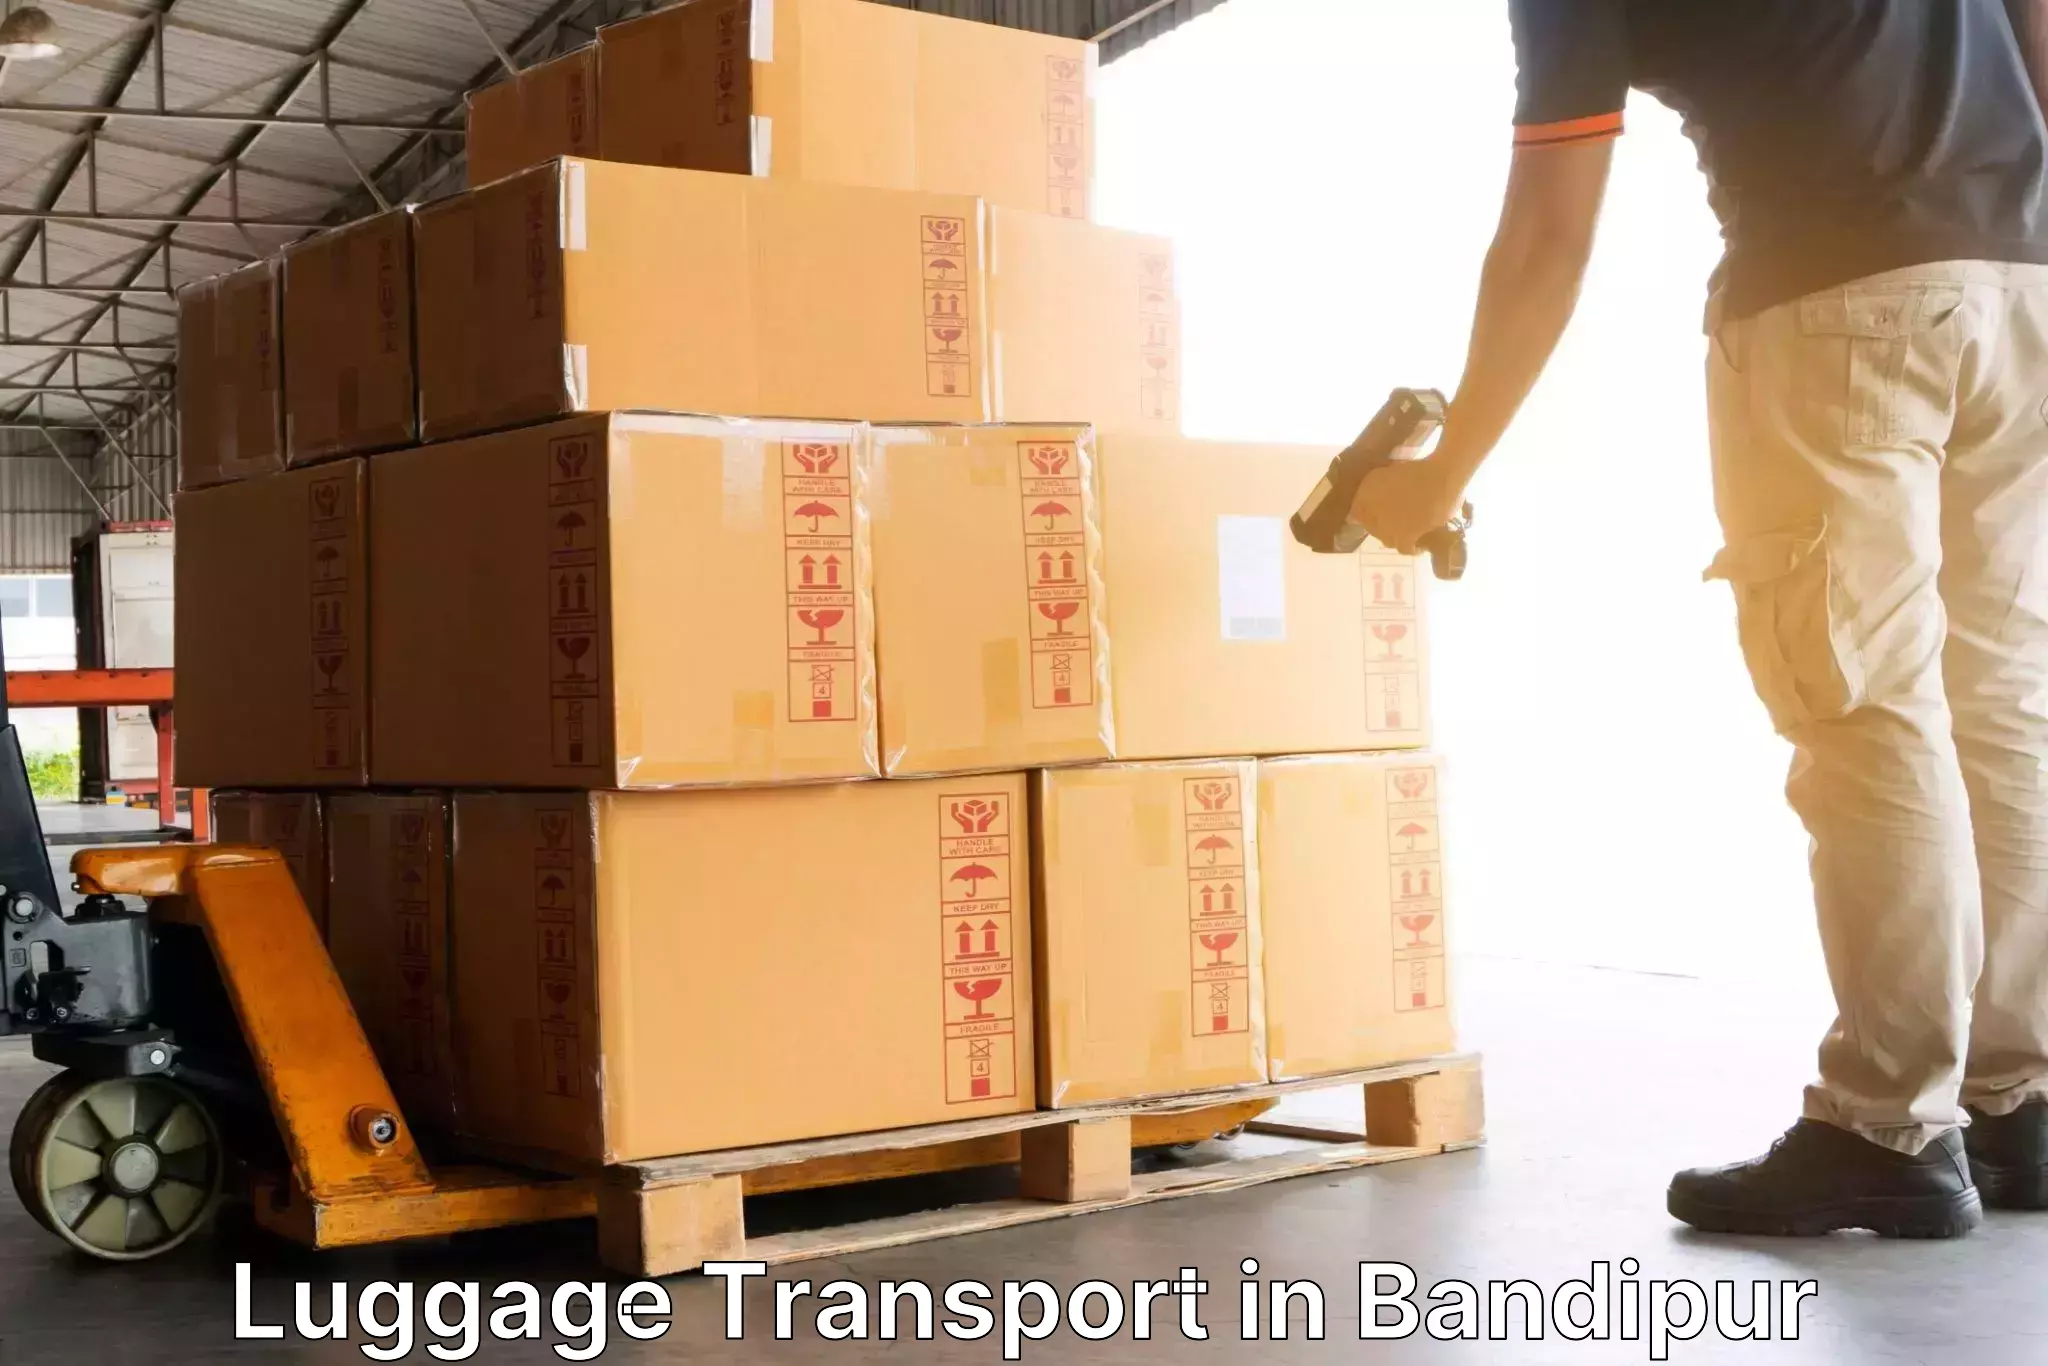 Luggage transport rates calculator in Bandipur